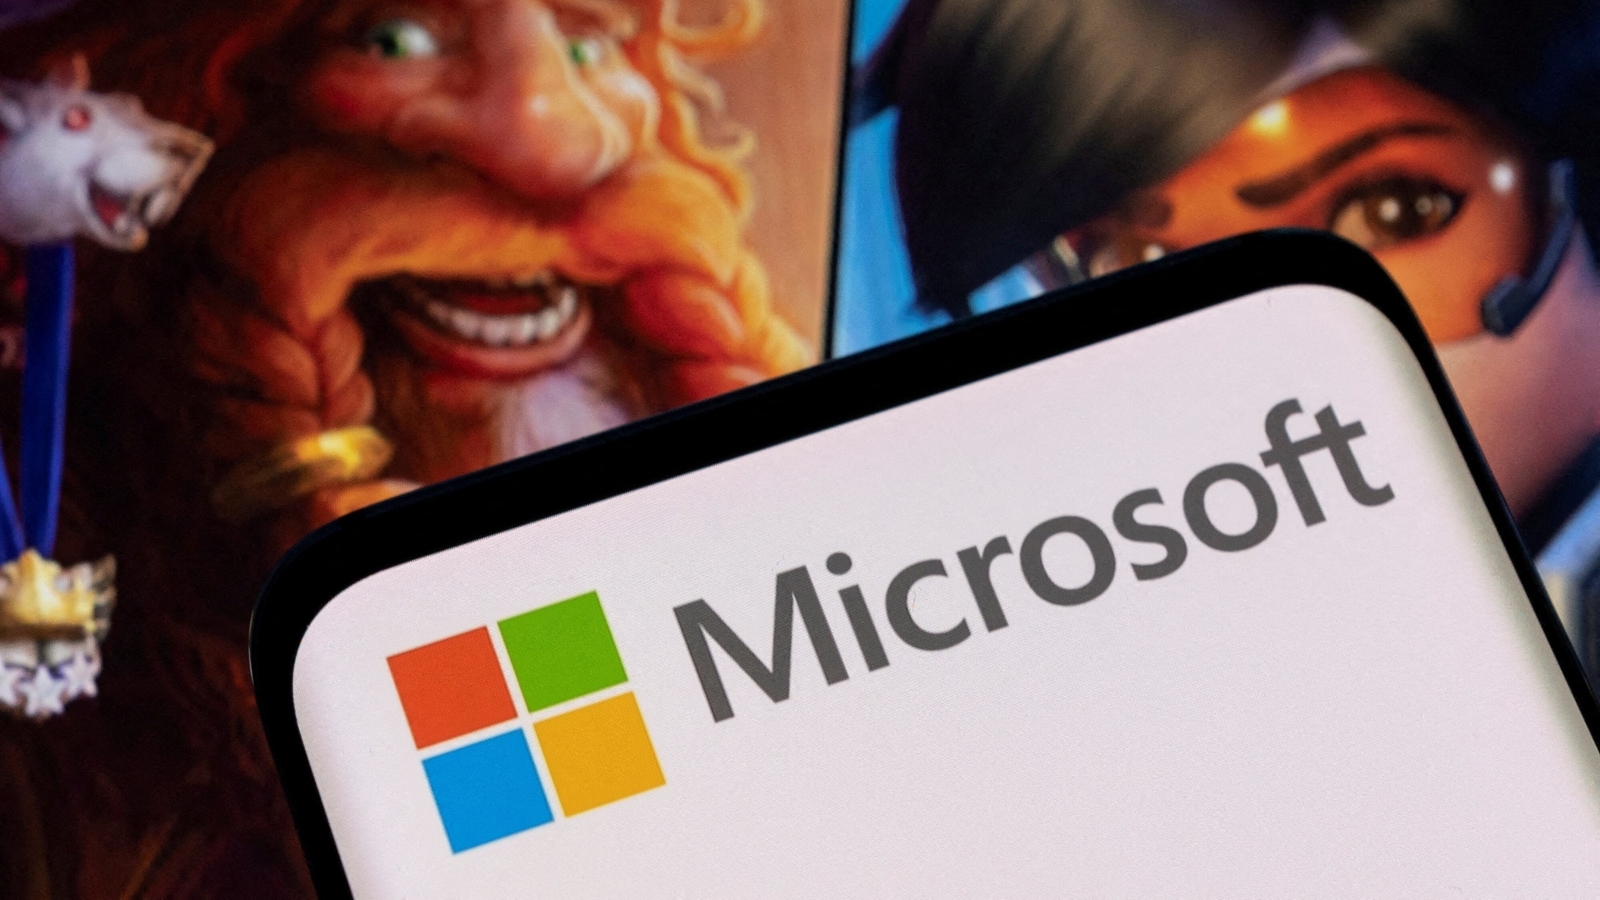 Microsoft Mistakenly Posts Secret Game Plans to Government Site